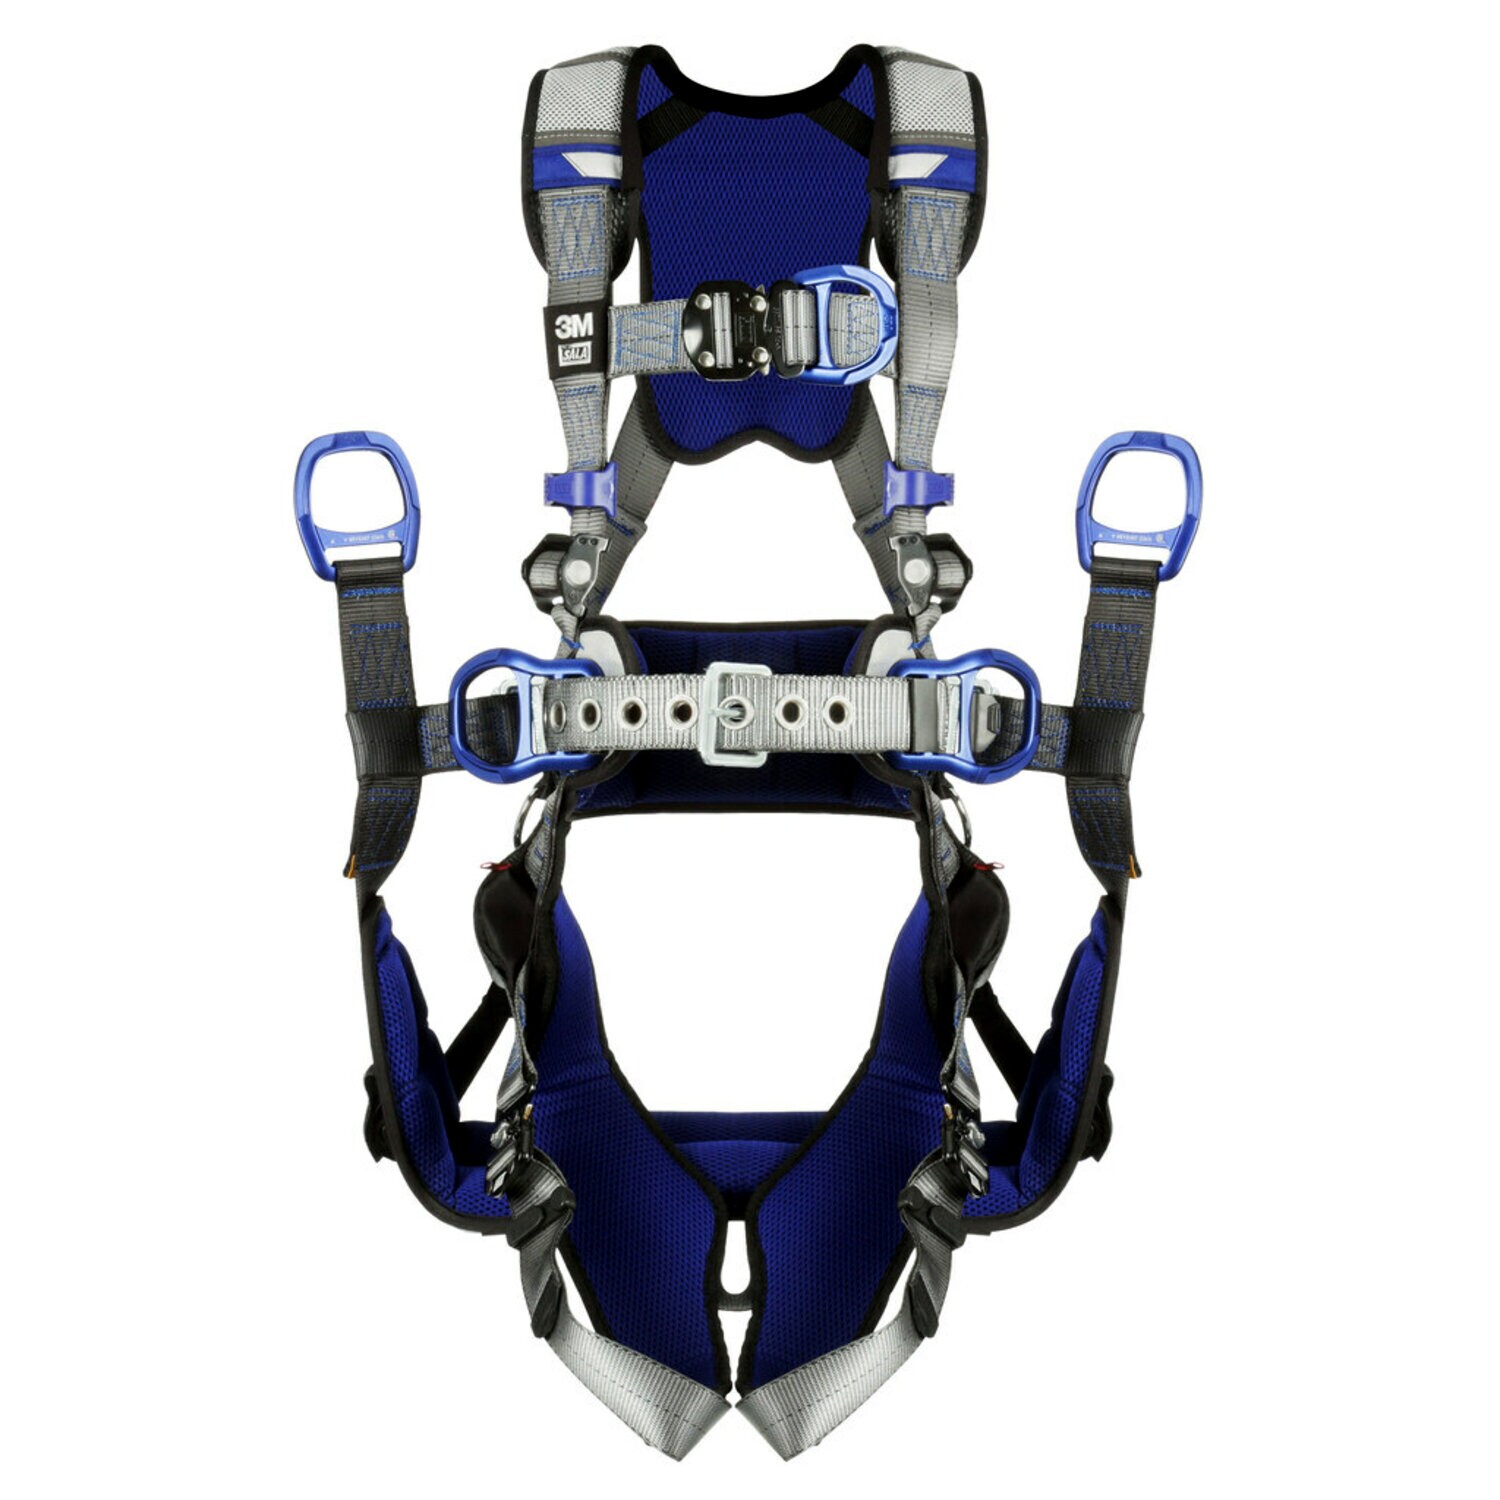 7012817878 - 3M DBI-SALA ExoFit X200 Comfort Tower Climbing/Positioning/Suspension Safety Harness 1402135, Small